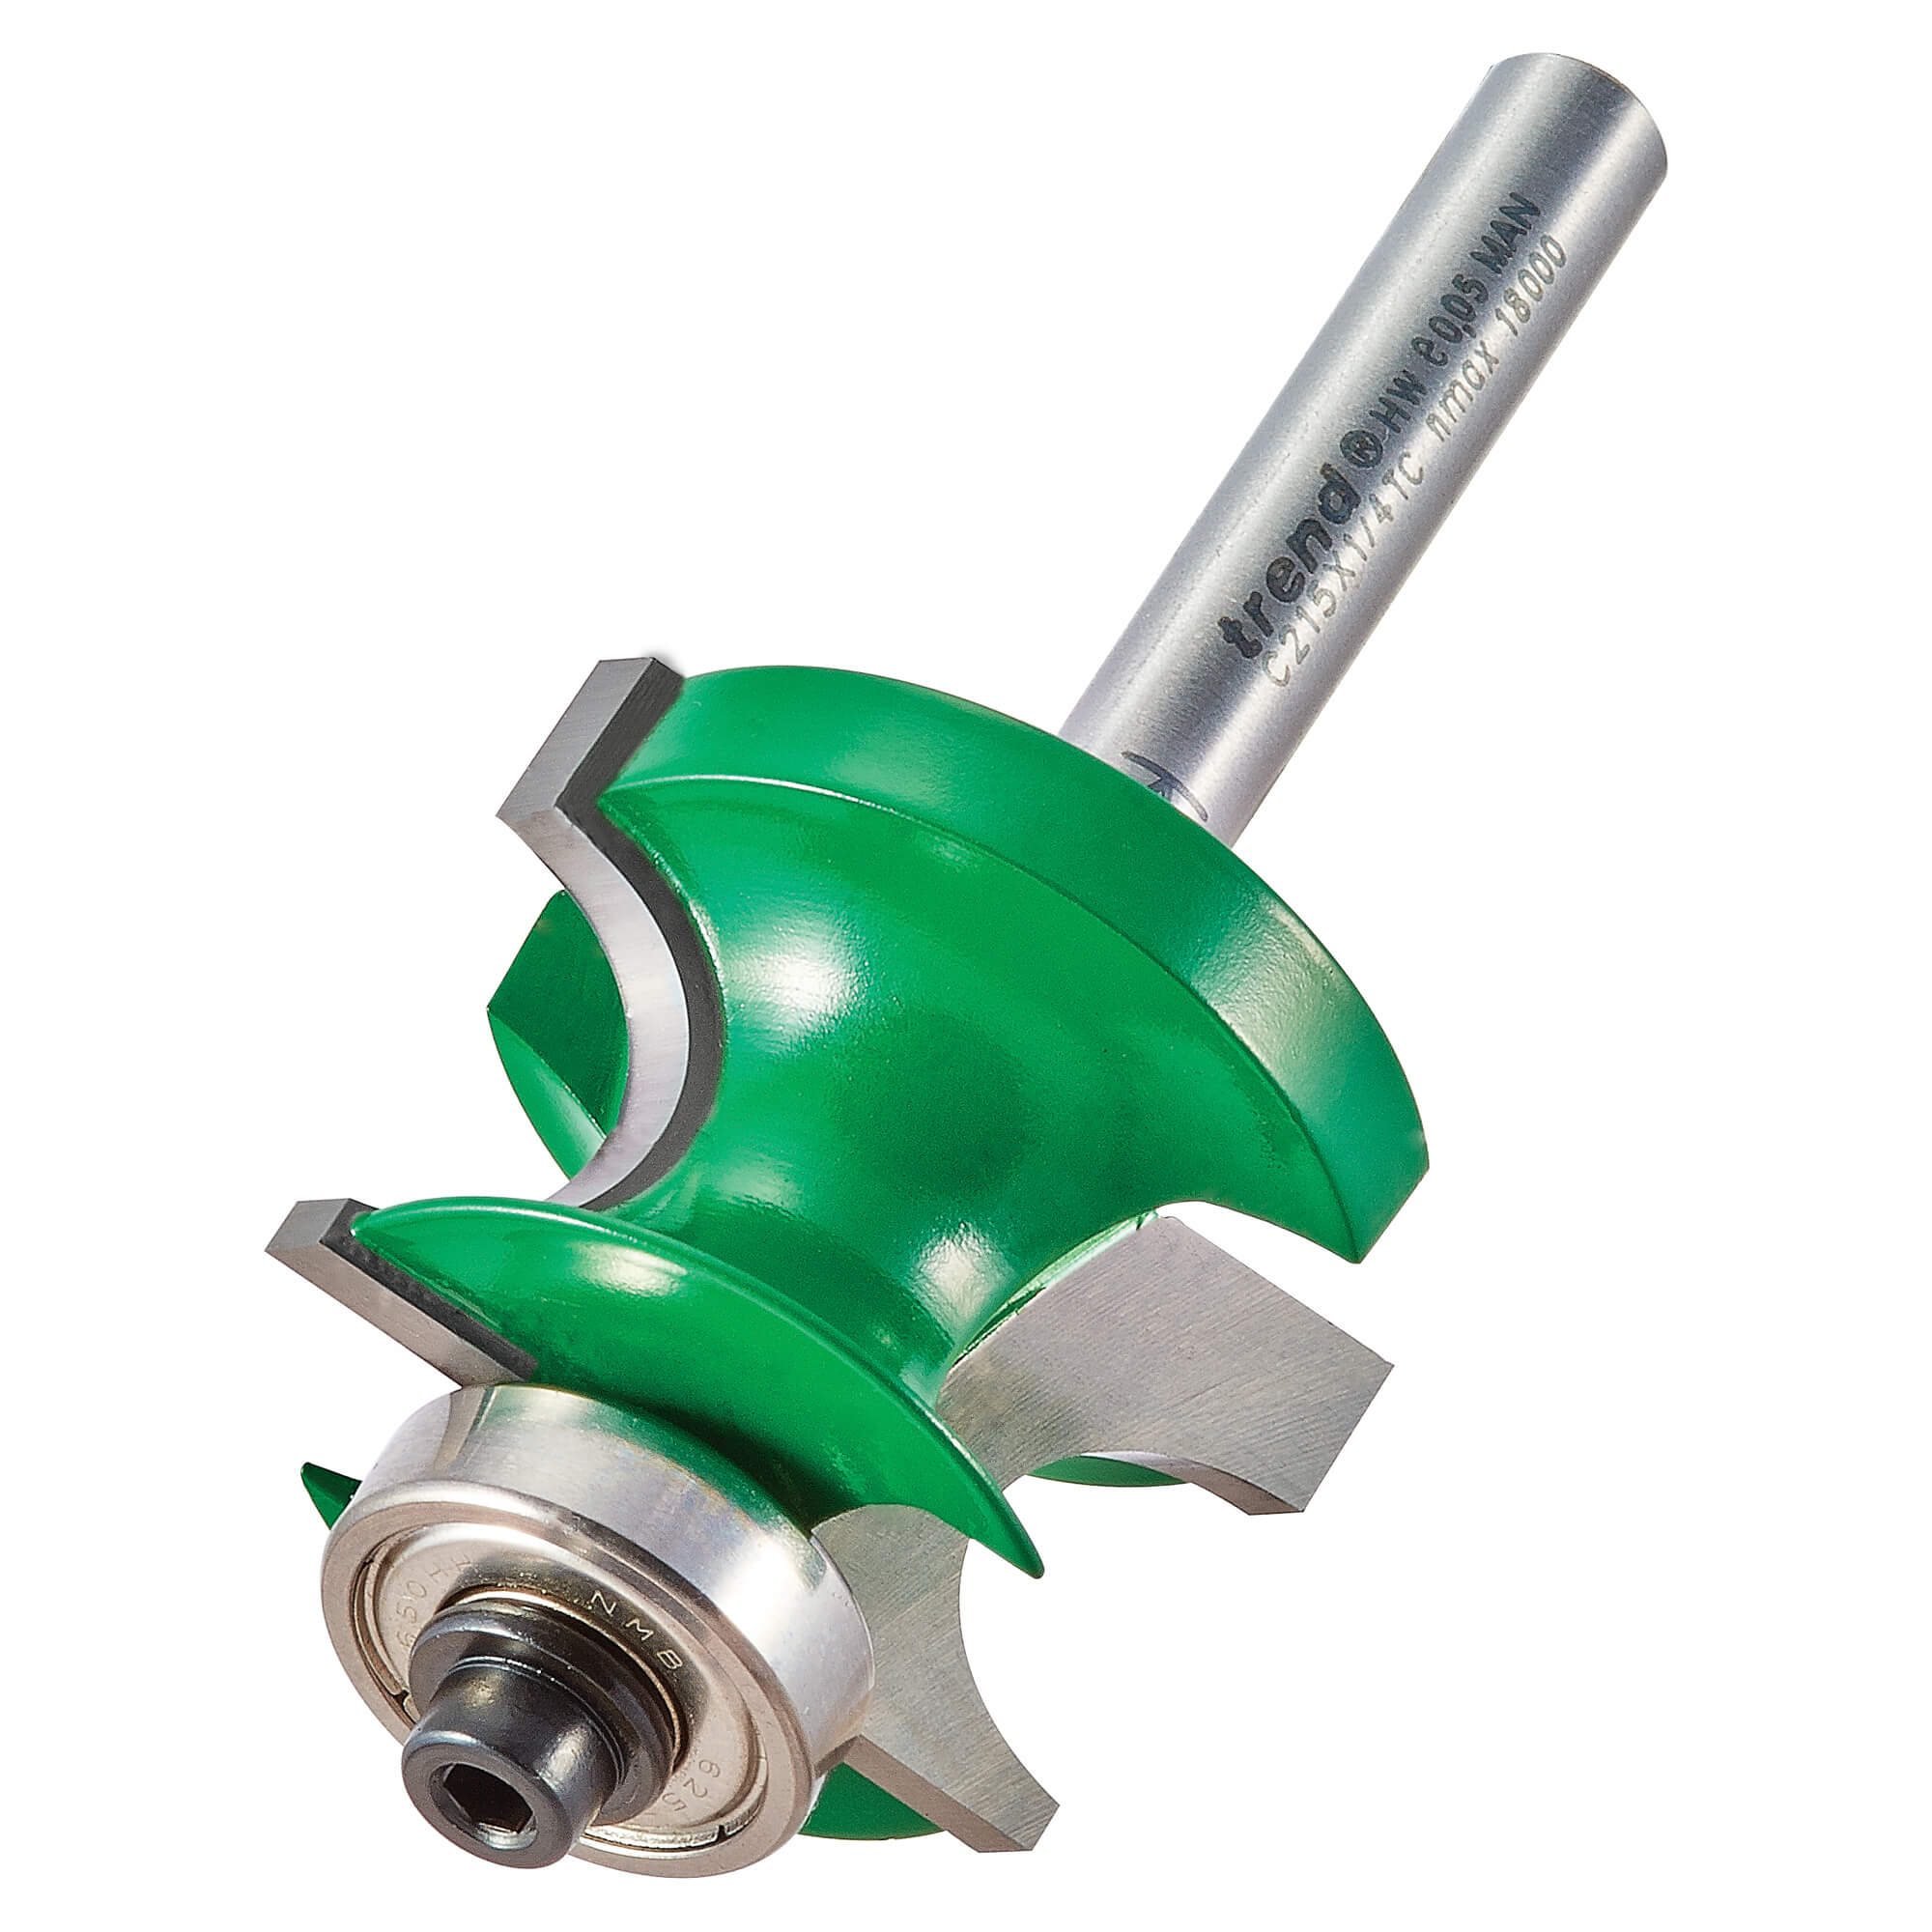 Image of Trend CRAFTPRO Bearing Guided Corner Bead Router Cutter 31.9mm 22.5mm 1/4"